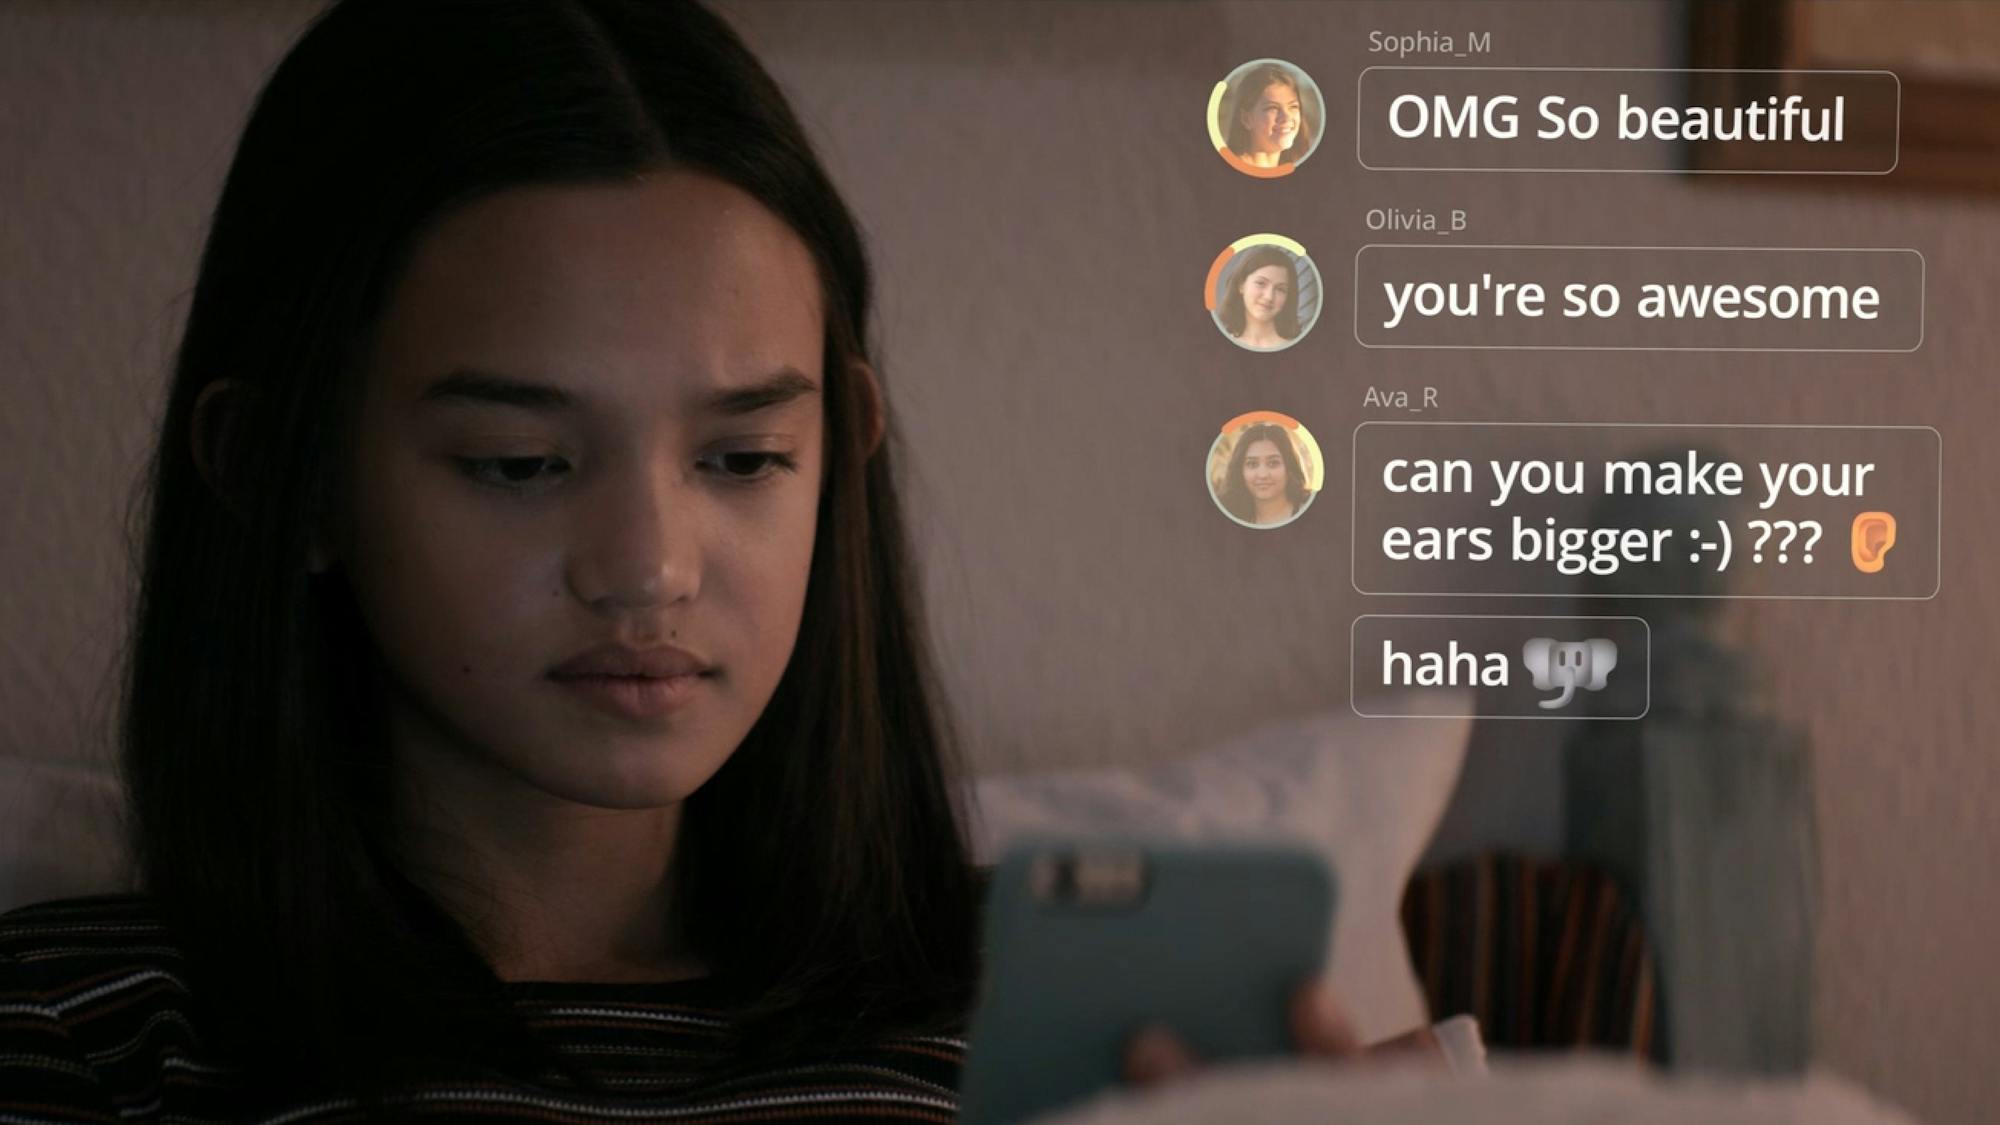 A young girl is pictured in her room, looking at her phone. Social media comments are superimposed on the frame, reading “OMG So beautiful”; “you’re so awesome”; and “Can you make your ears bigger?”